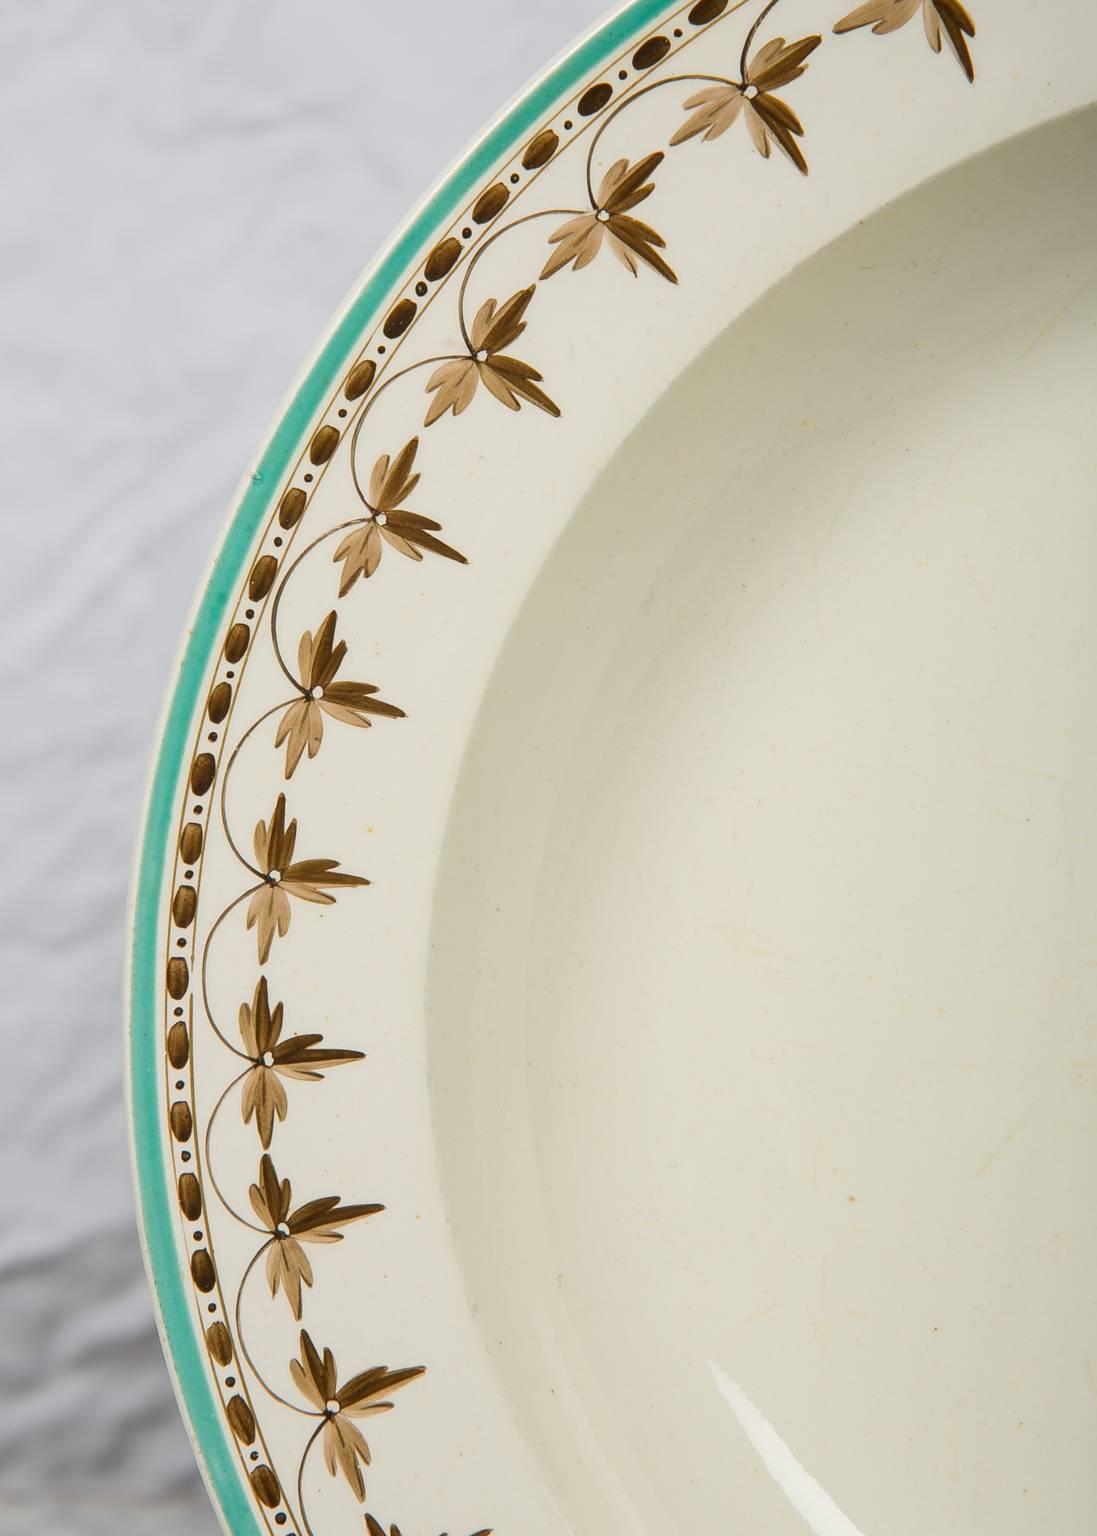 We are pleased to offer this set of eleven Wedgwood 18th century creamware soup dishes the borders decorated with a beautiful brown necklace design, highlighted by a lively turquoise painted edge.
The dishes measure 9.75 inches diameter.
The